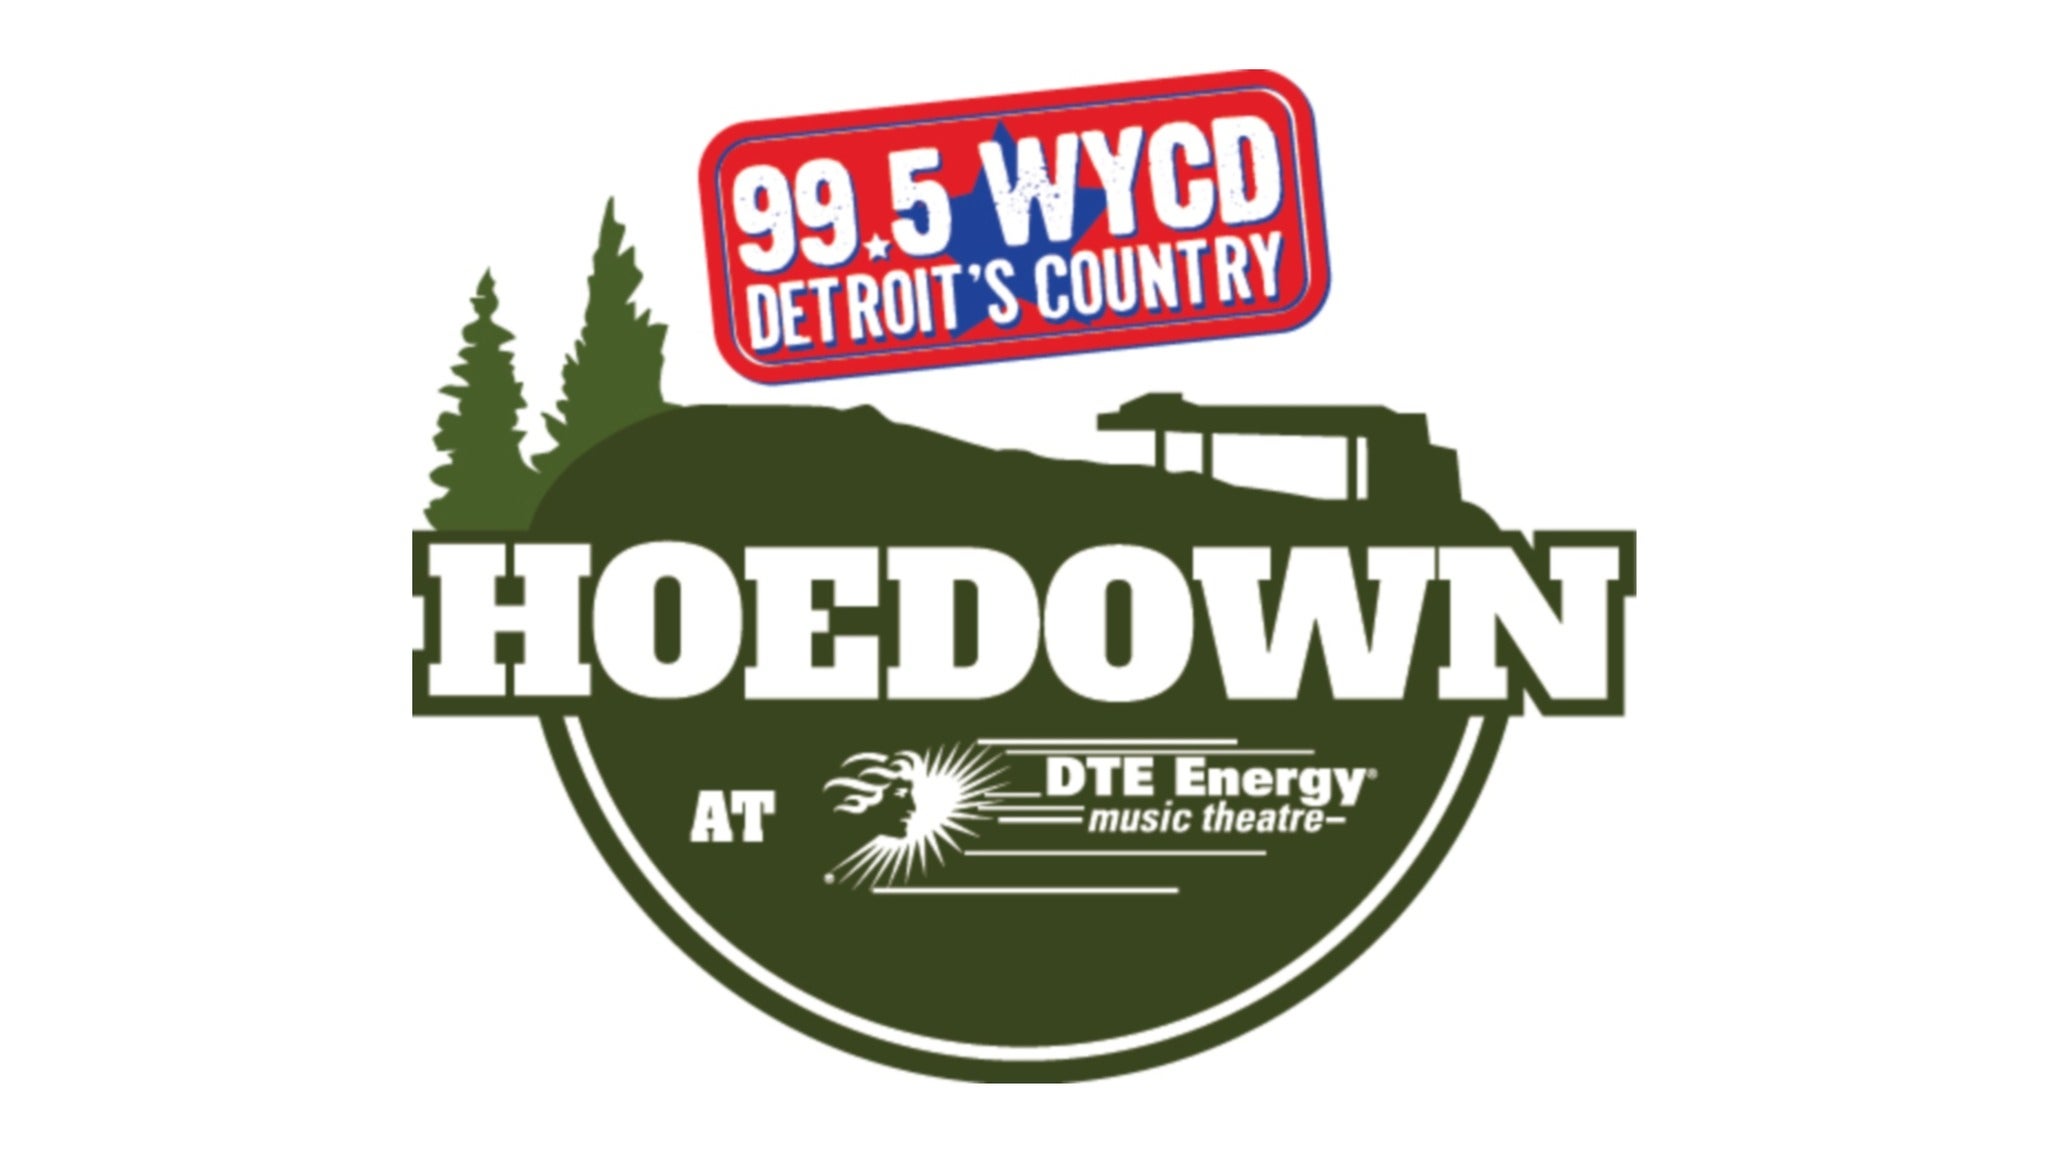 99.5 WYCD Hoedown Featuring Lady A in Clarkston promo photo for Fan Club VIP Package presale offer code